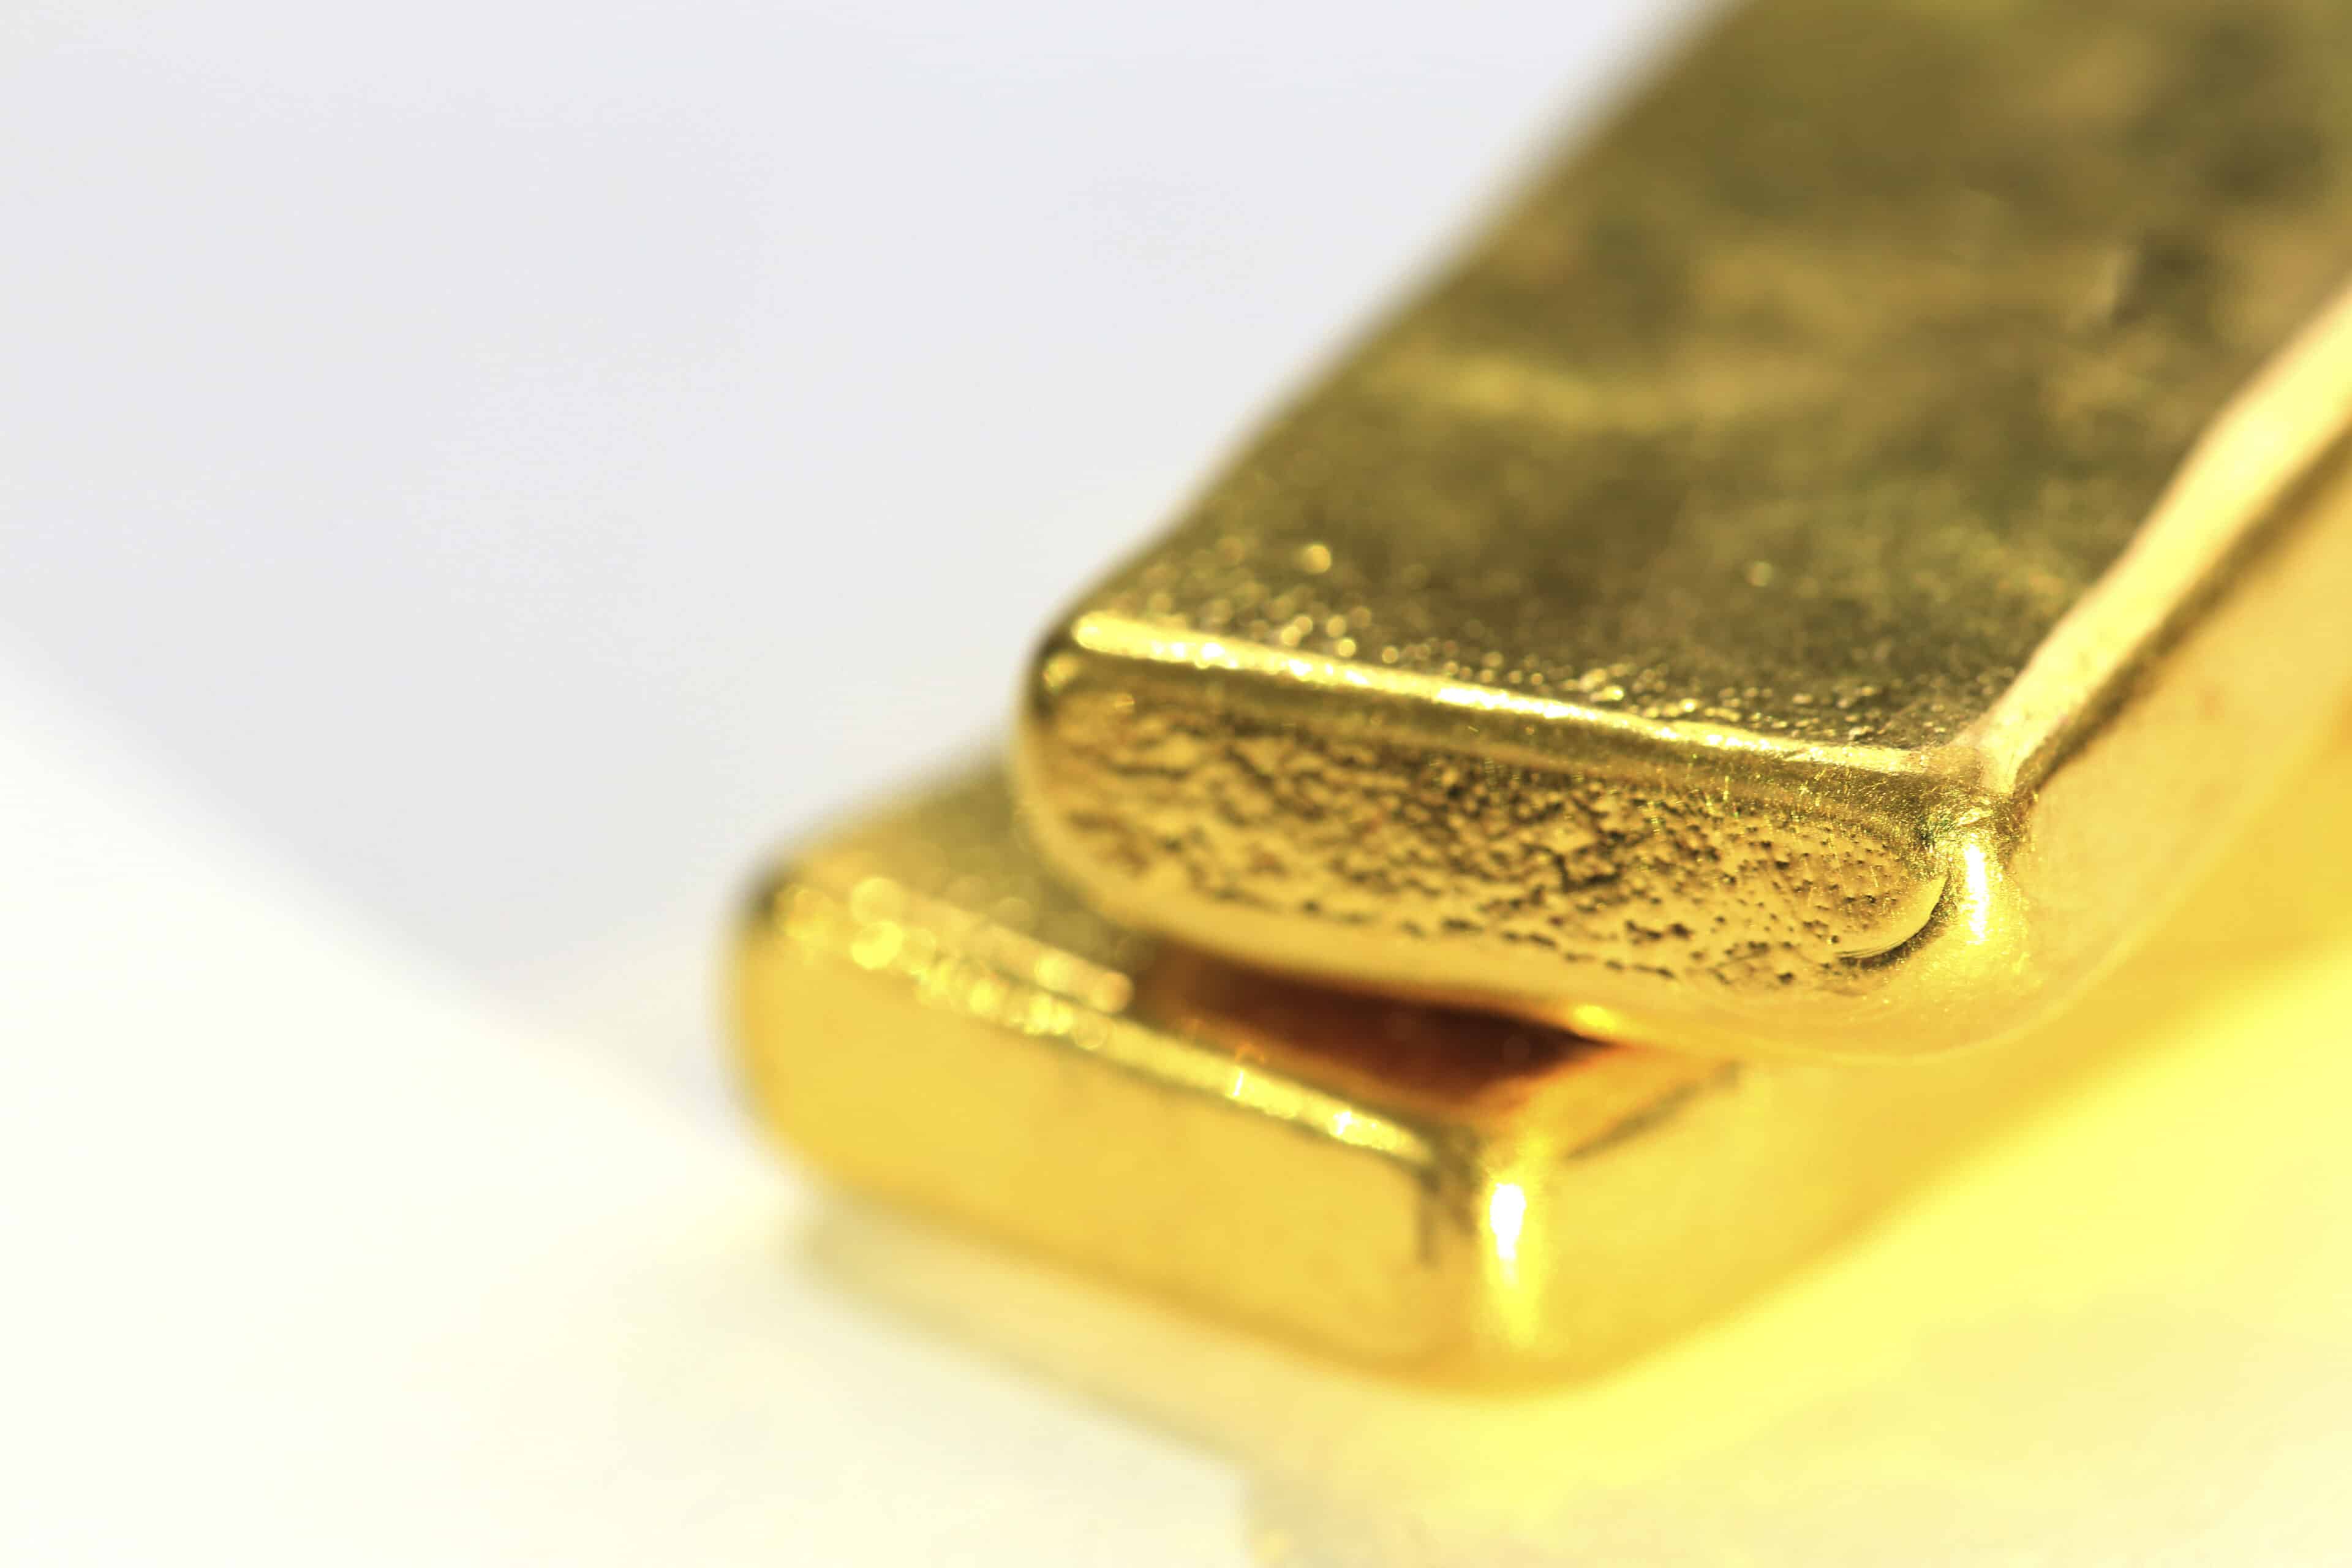 Buying gold in the form of Gold bars